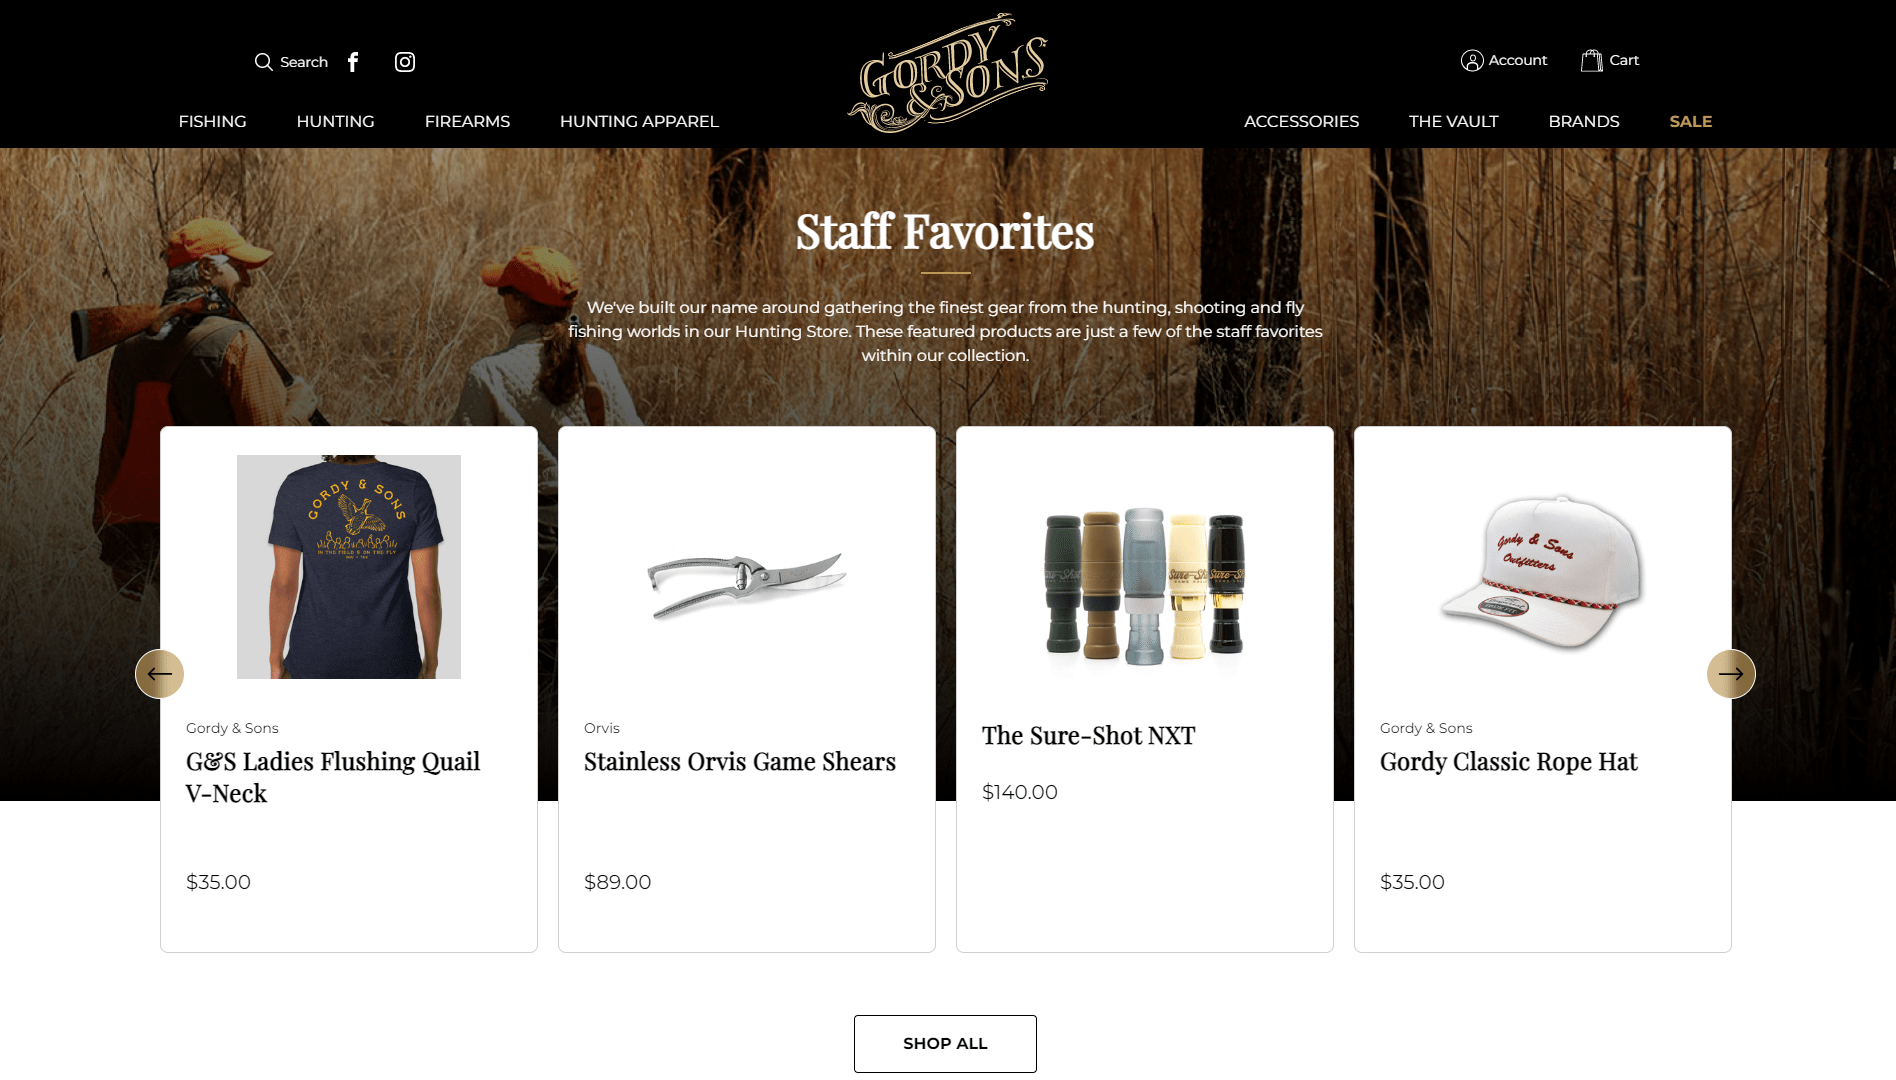 E-commerce website showcasing 'Staff Favorites' with hunting gear and apparel such as shirts, game shears, ammunition, and a hat.